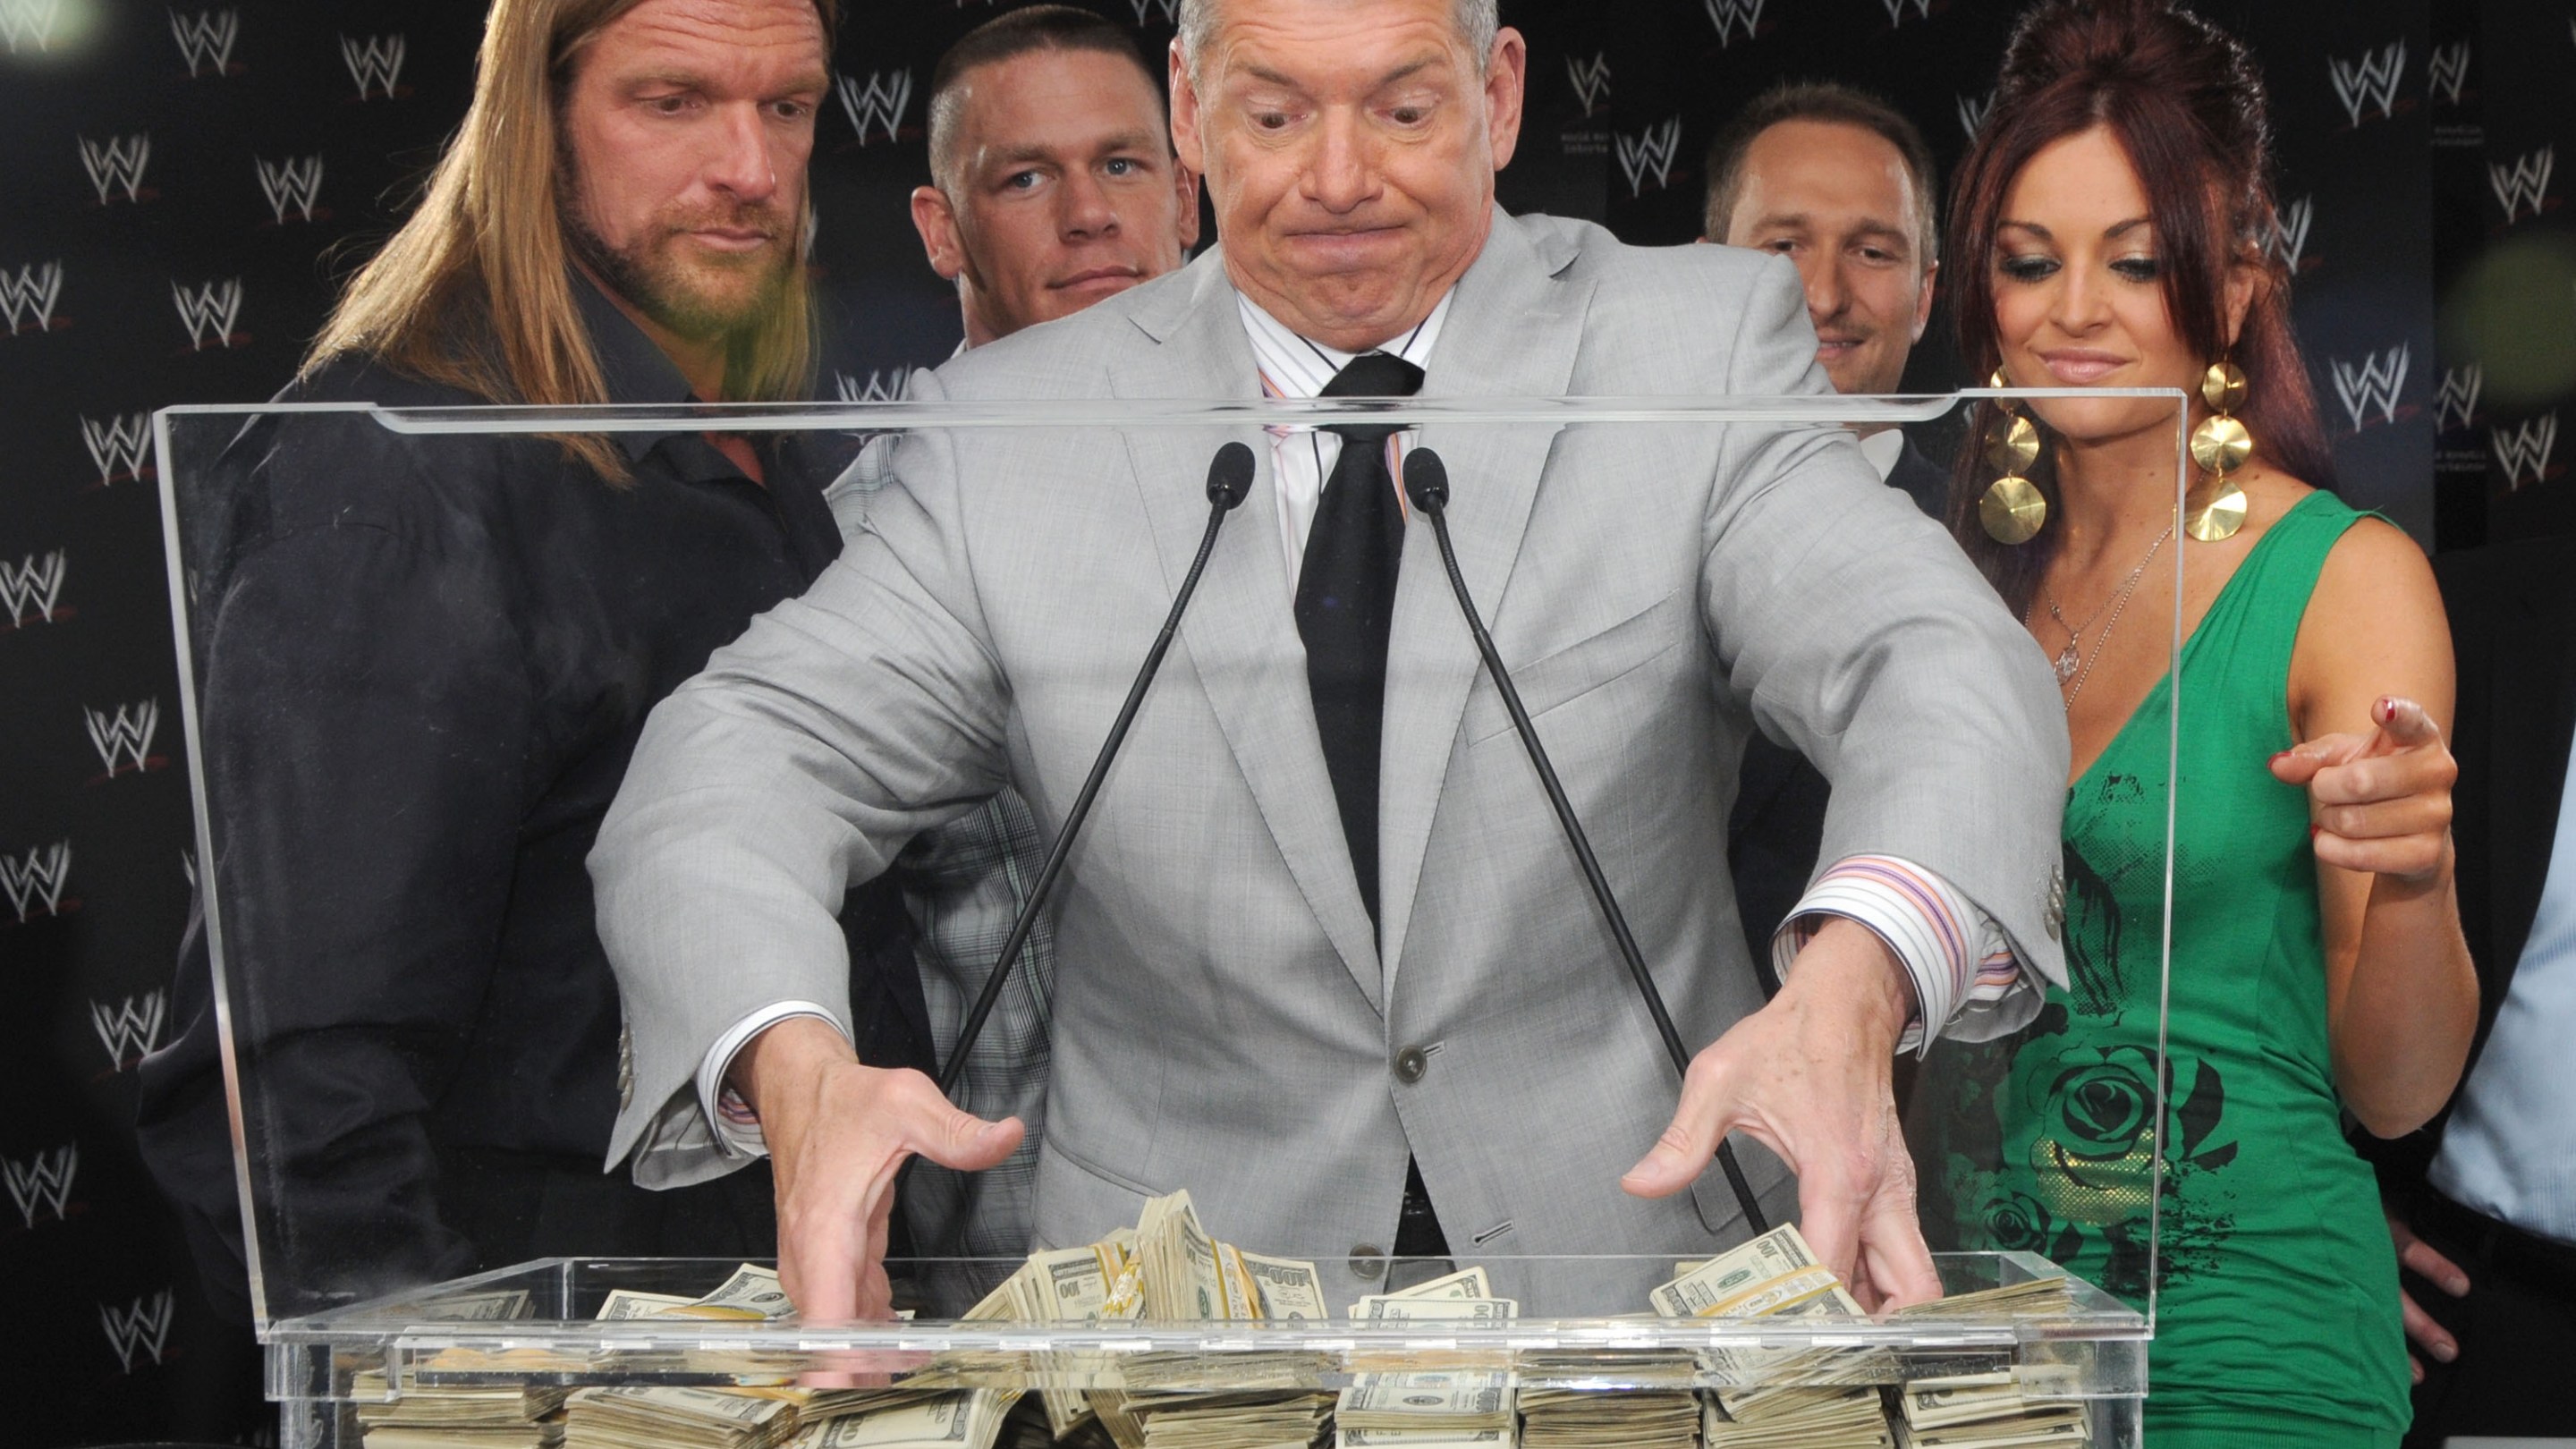 Vince McMahon at a press conference